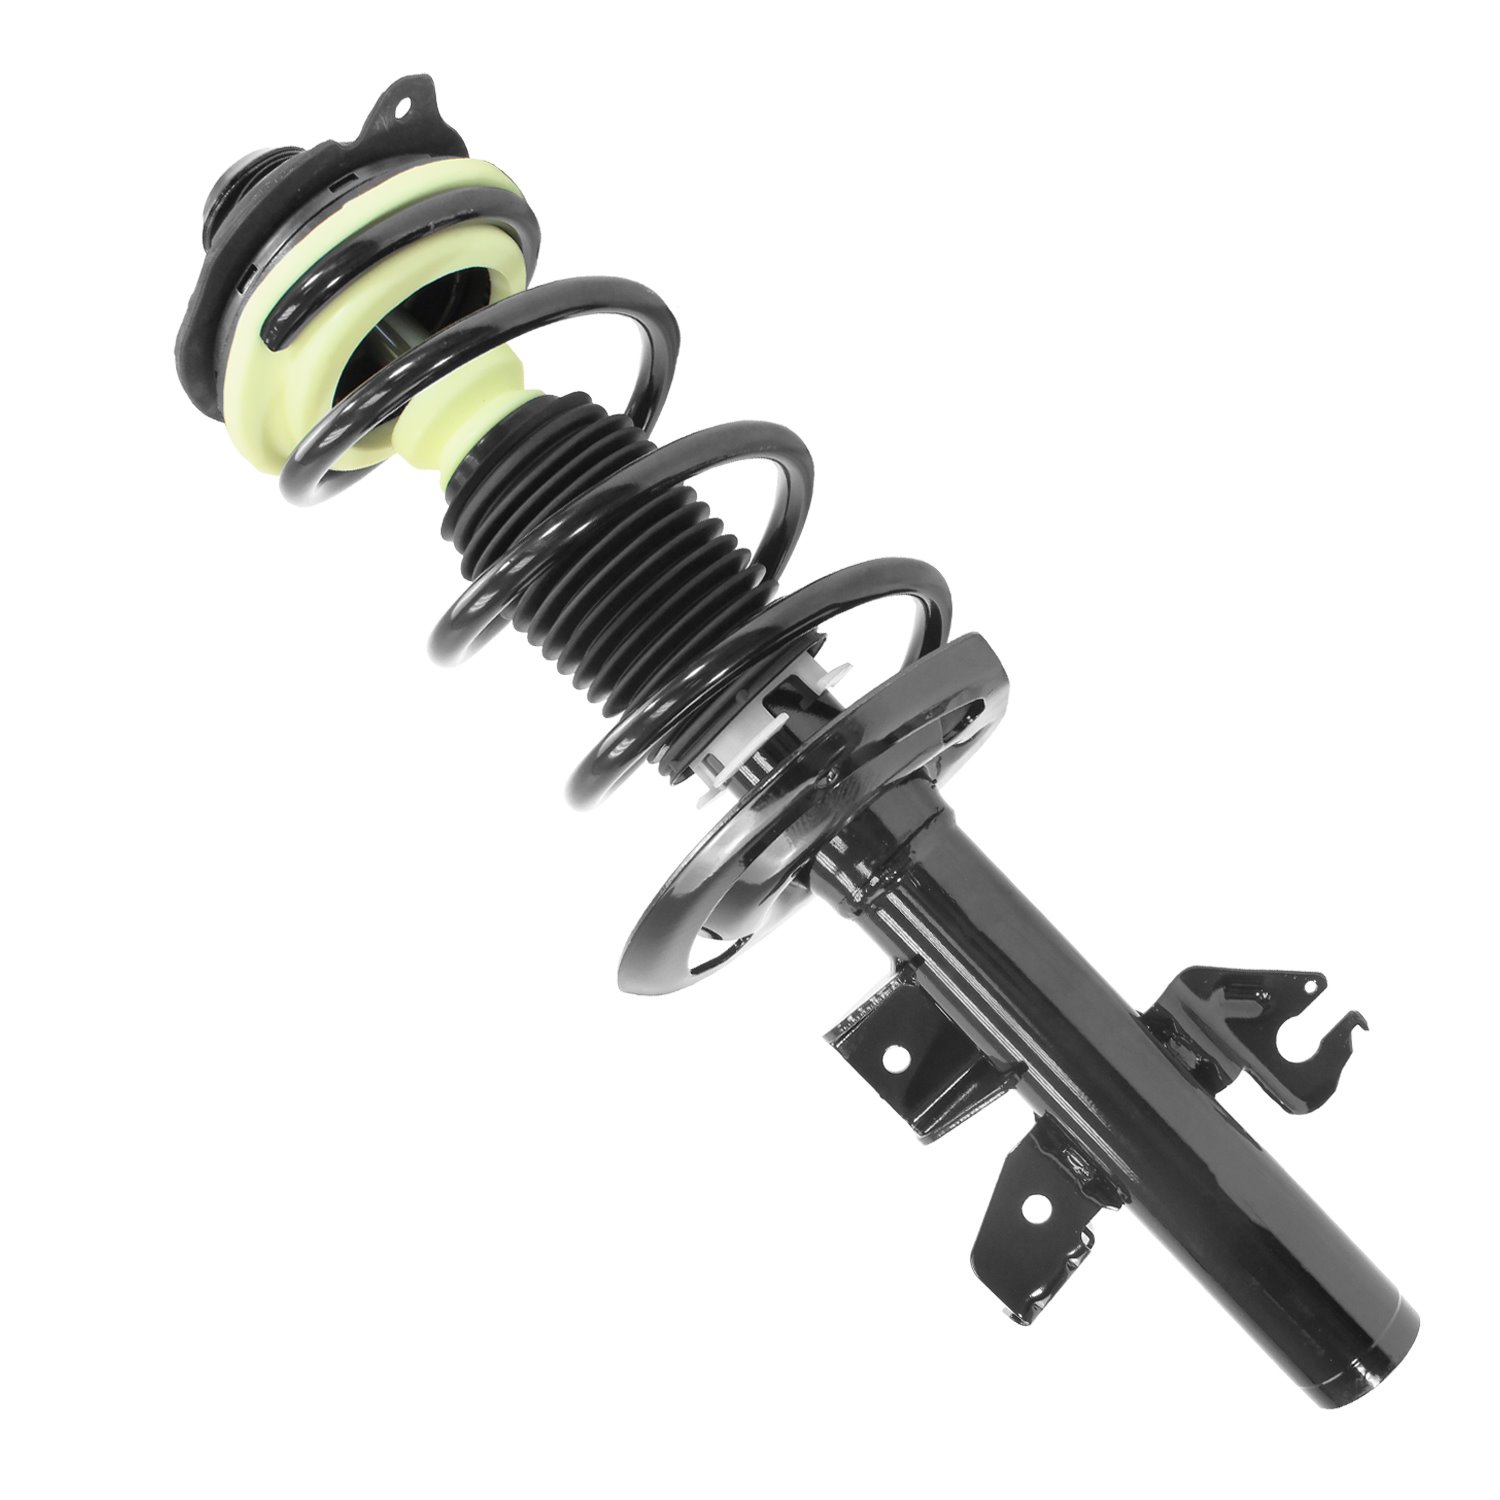 13671 Front Suspension Strut & Coil Spring Assemby Fits Select Chrysler 200